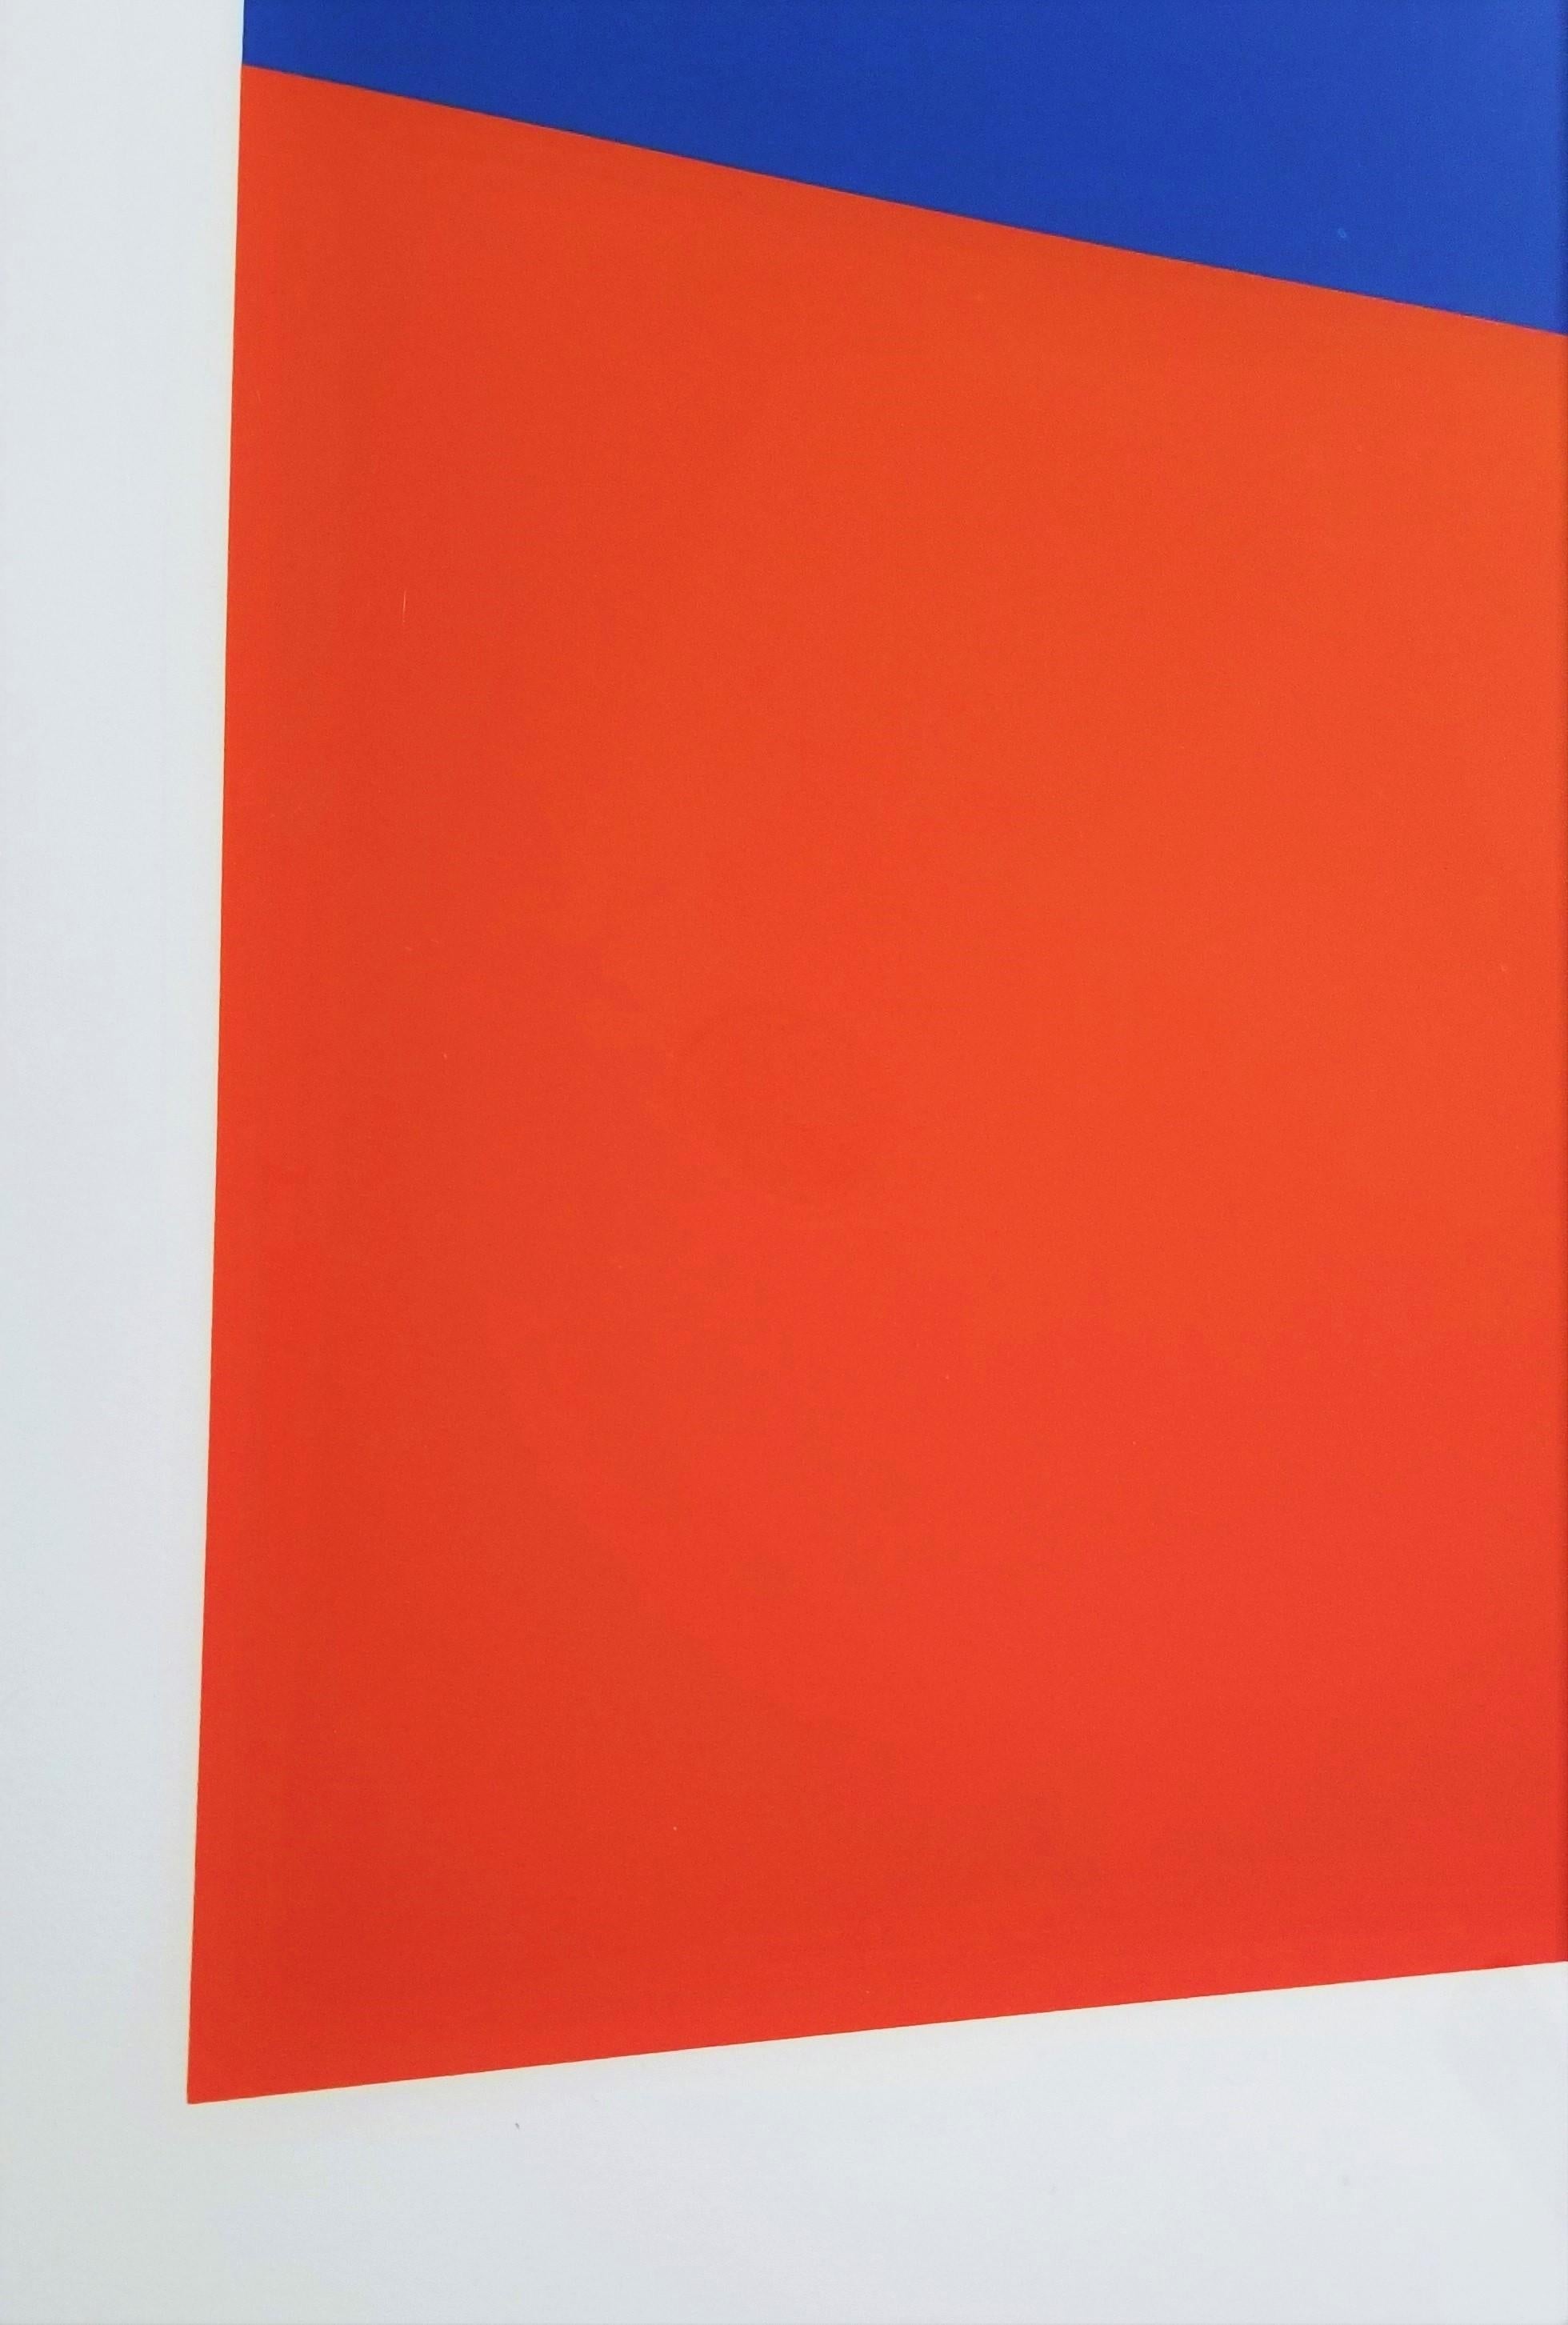 Blue/Red-Orange /// Contemporary Abstract Geometric Minimalism Ellsworth Kelly  For Sale 4